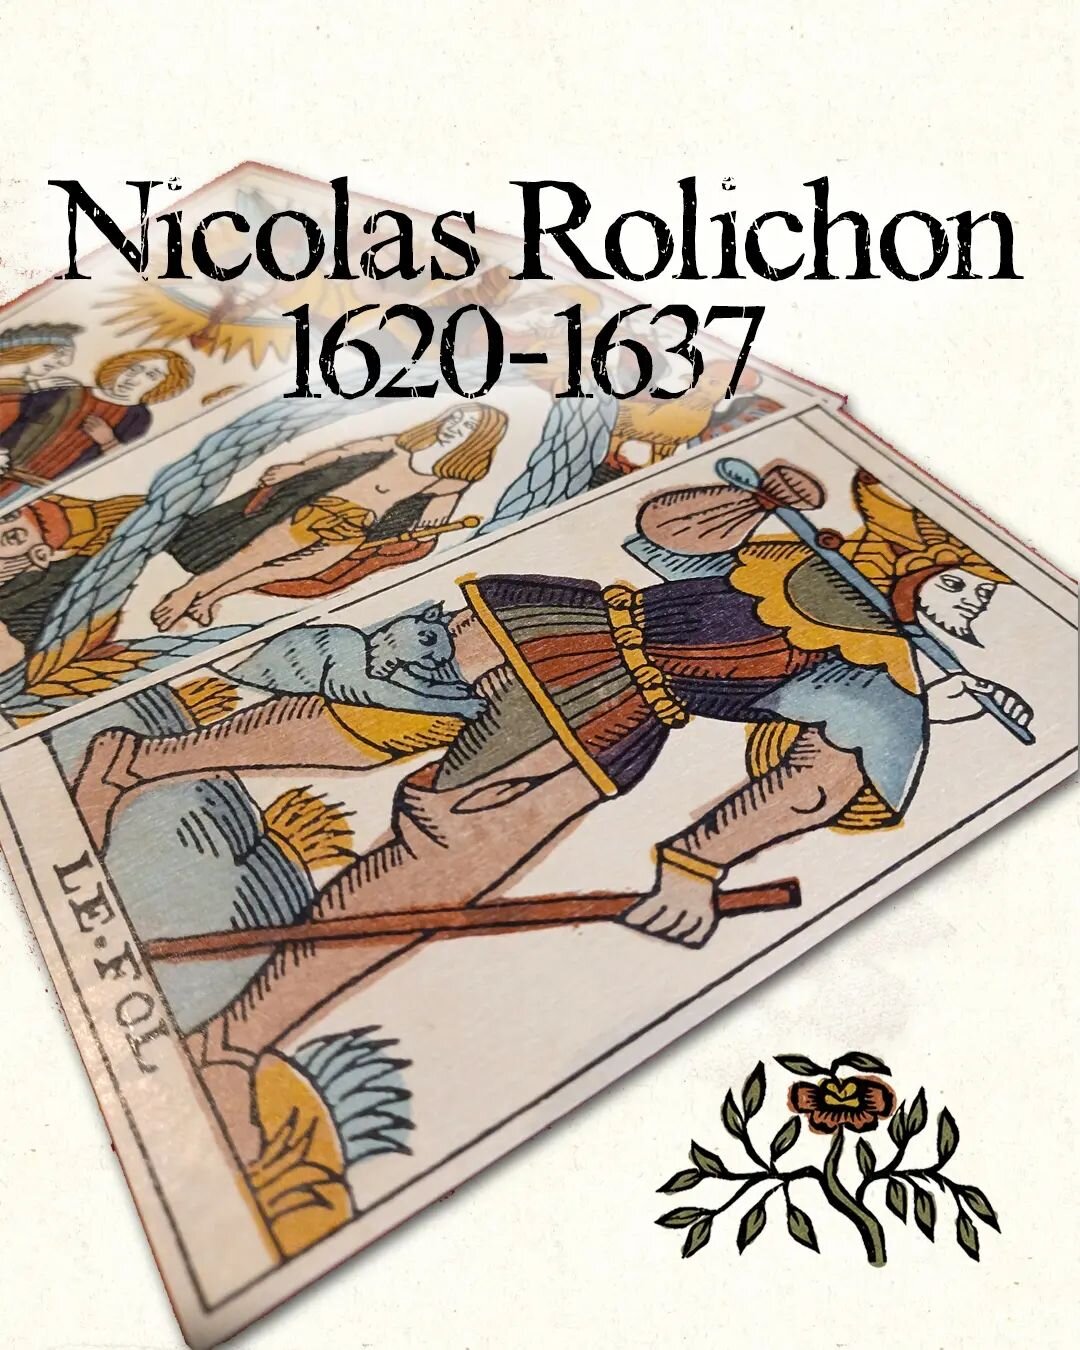 Hello,
I am happy to announce you that my handcrafted and manufactured editions of the Nicolas Rolichon's tarot are ow available on my online store 👌

⚠️ Limited to 50 copies only !

#tarotdemarseille #tarotdeck #tarotdecks #tarotdecksforsale #tarot